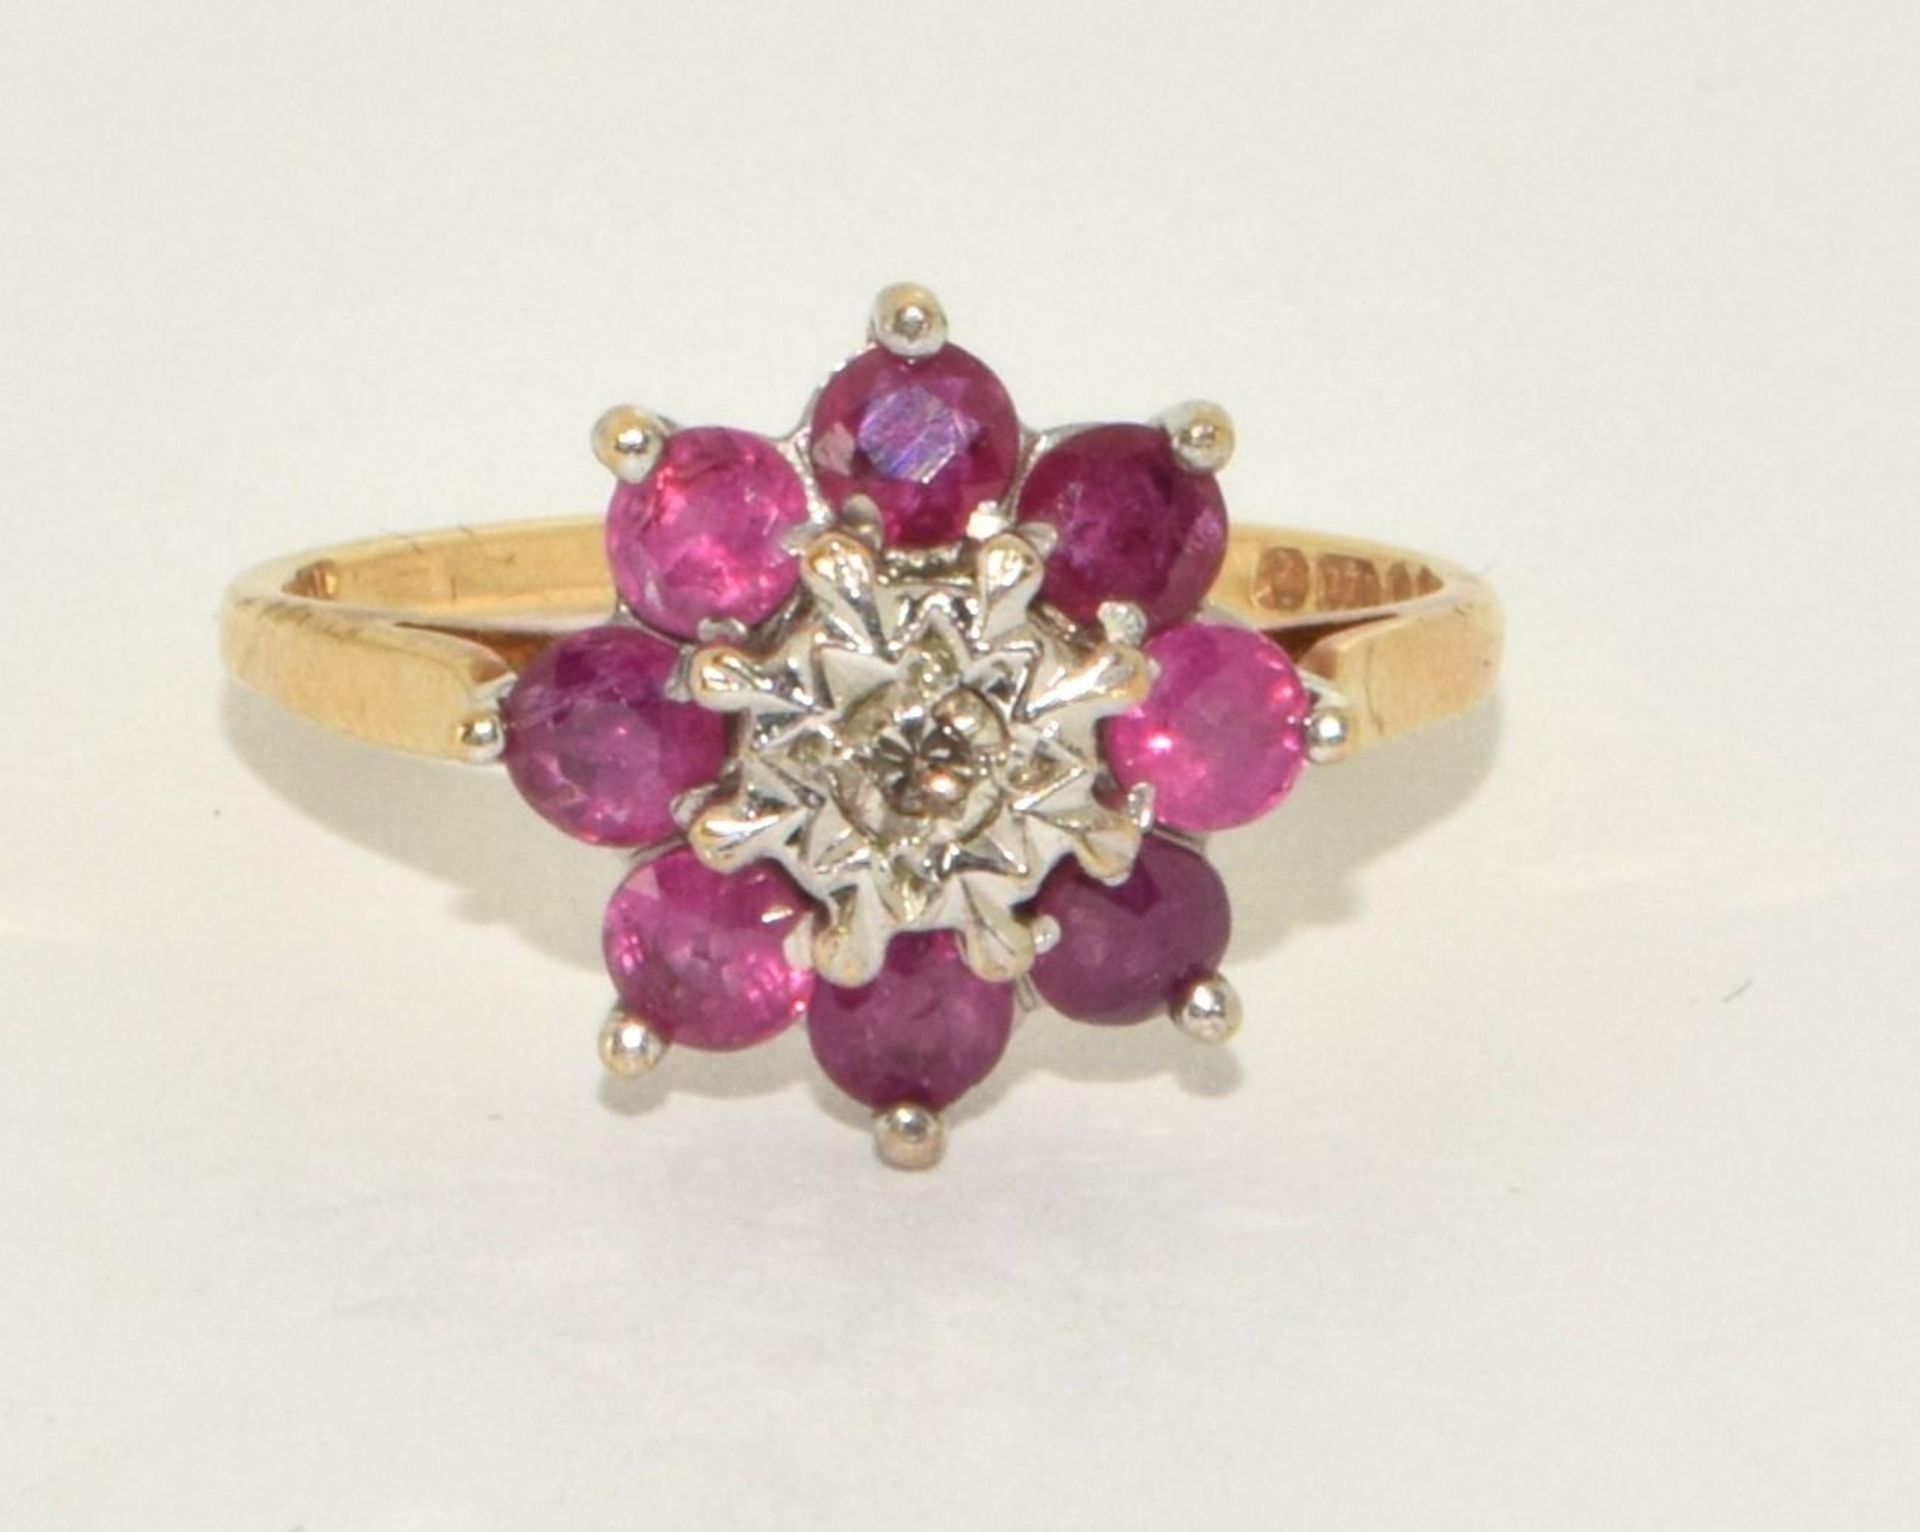 9ct gold ladies antique set Ruby and Diamond cluster ring size M